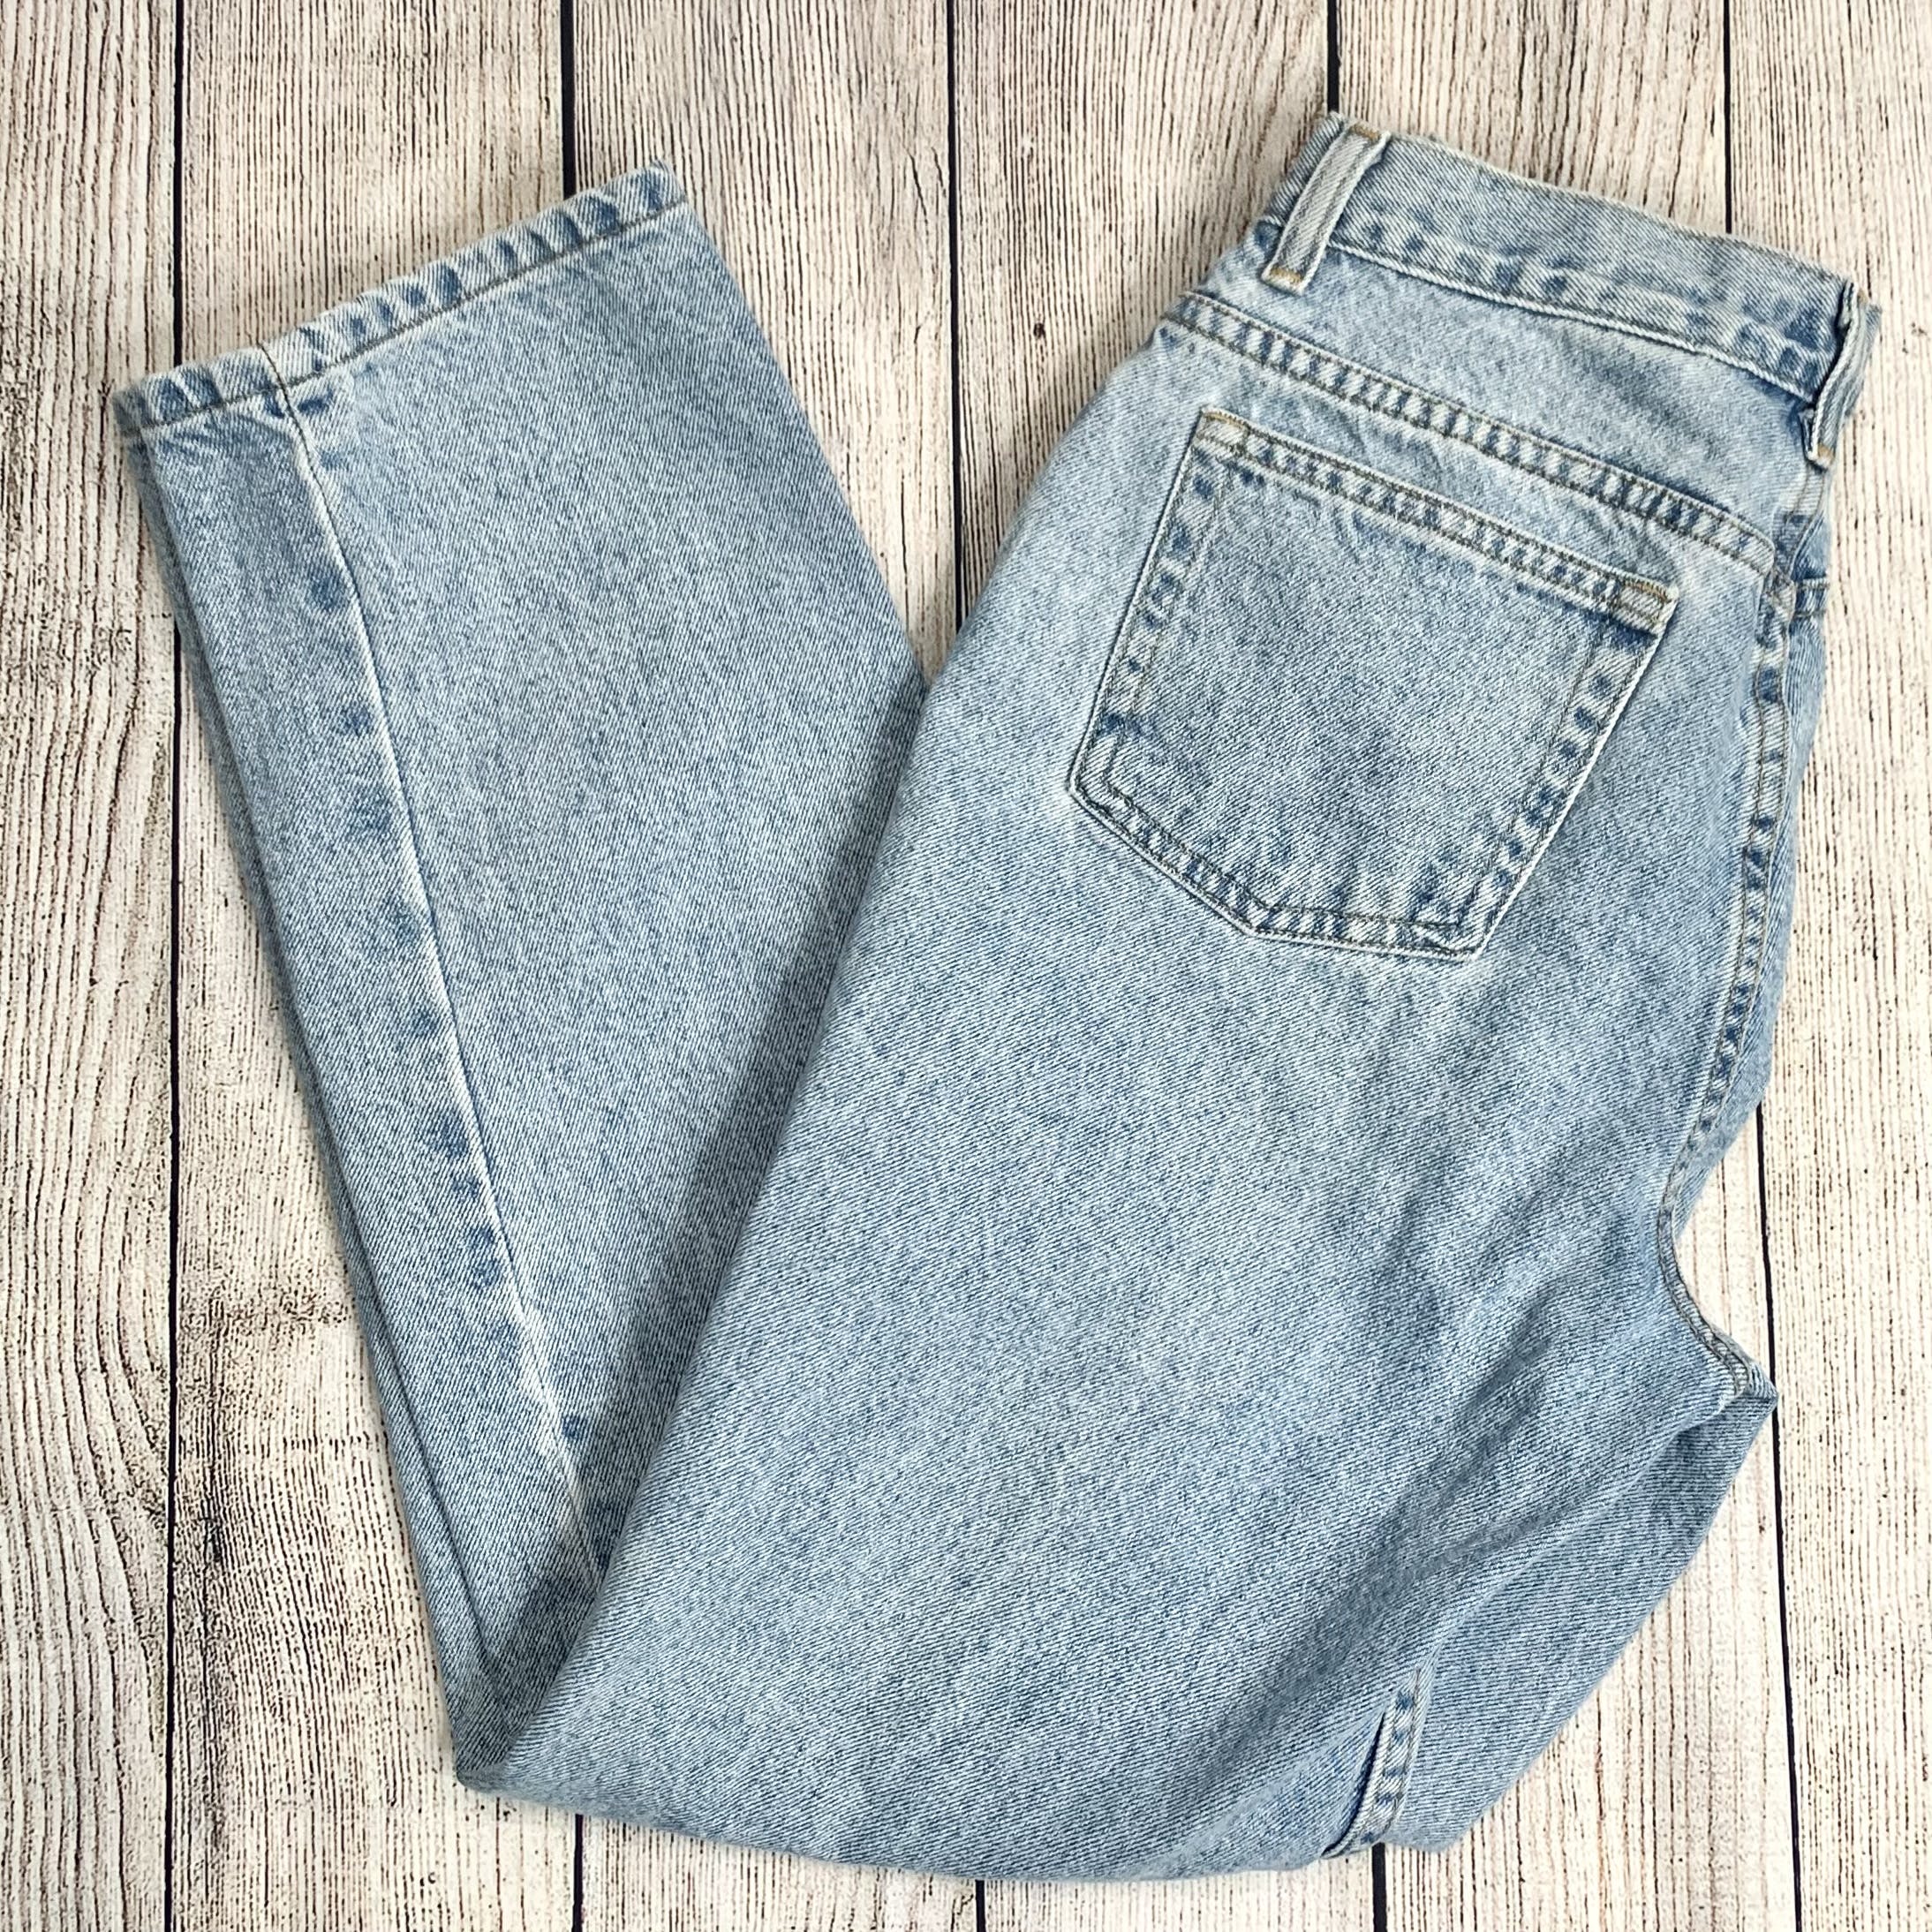 Vintage High Waist Tapered Leg Mom Jeans by Covington | Shop THRILLING